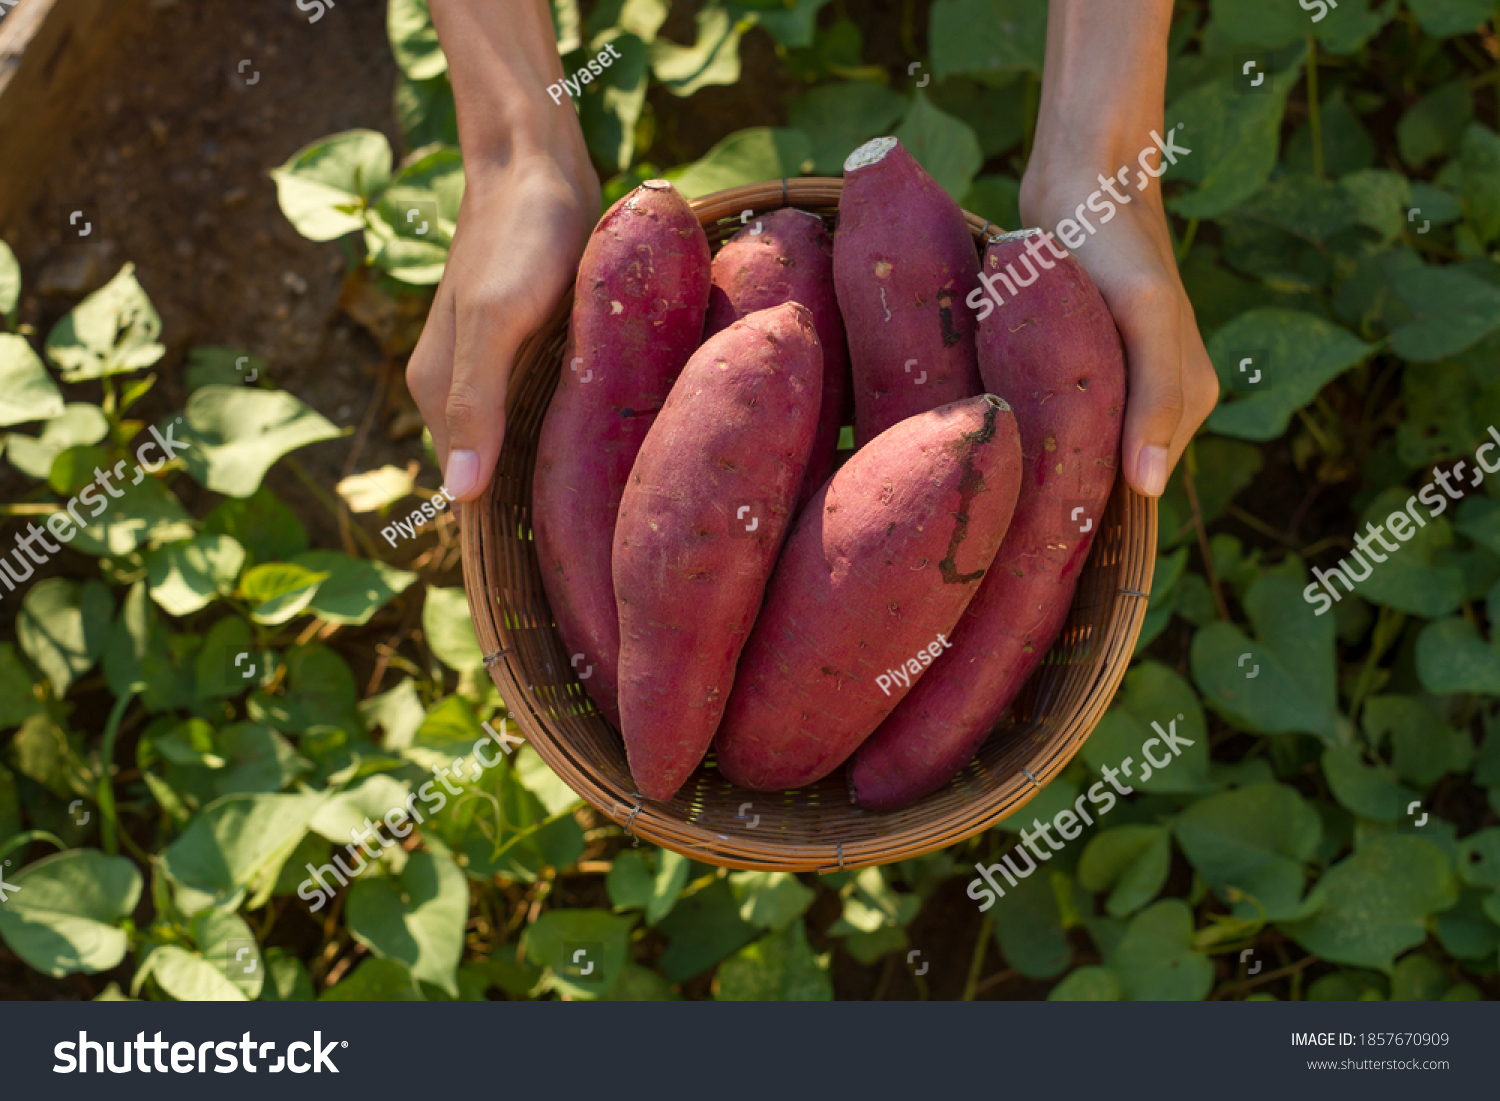 Farmer hold Fresh sweet potato product in wood basket with green leaf of sweet potato plant on background #1857670909